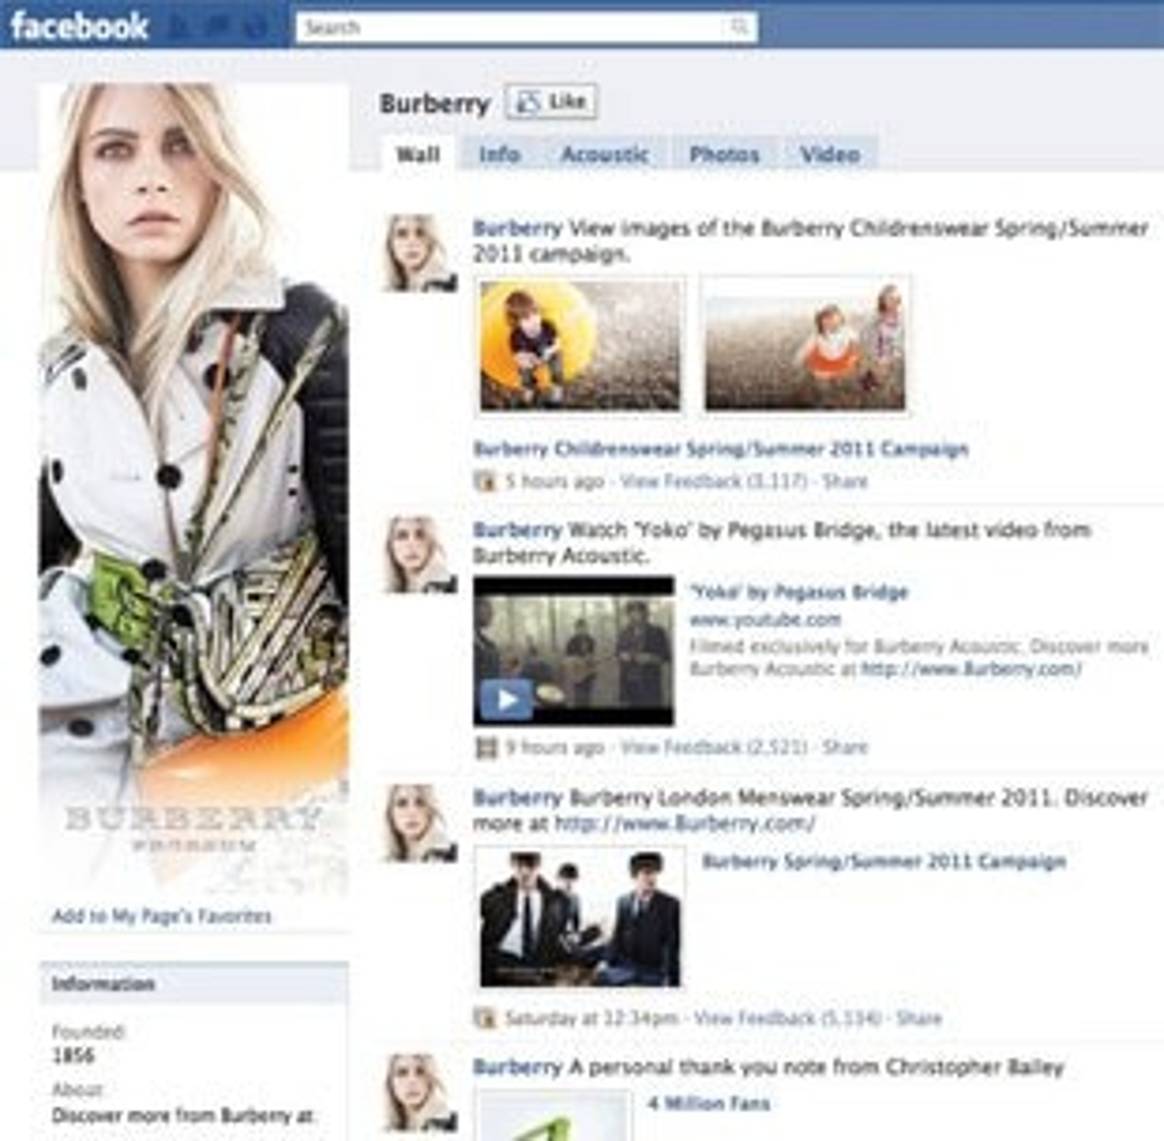 Online advertising is changing scope for fashion brands